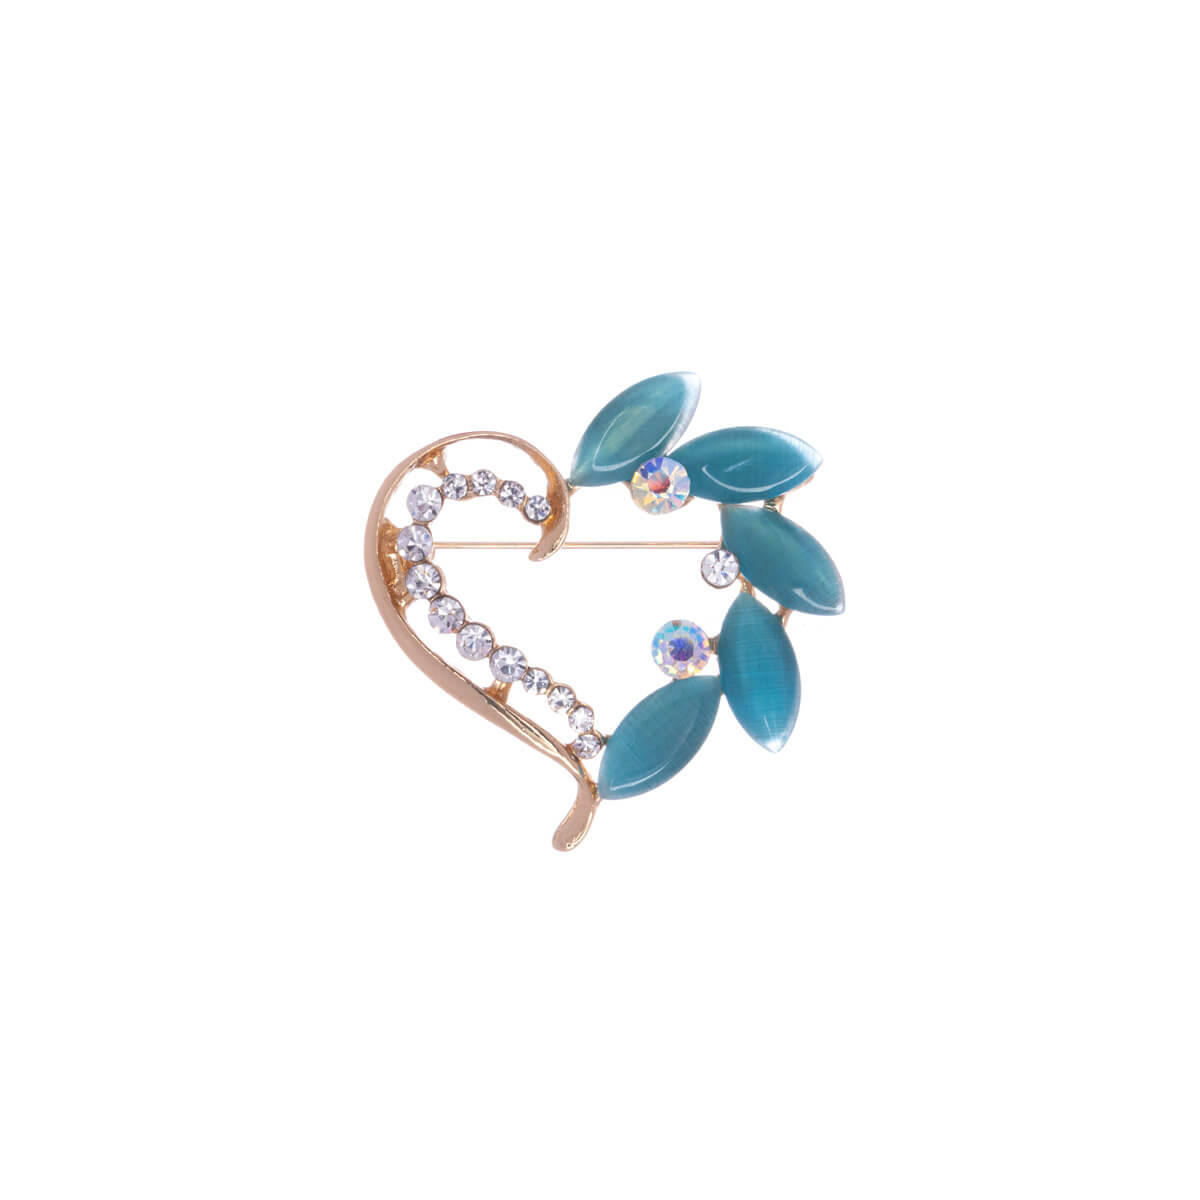 A glittering flower of the heart of the brooch